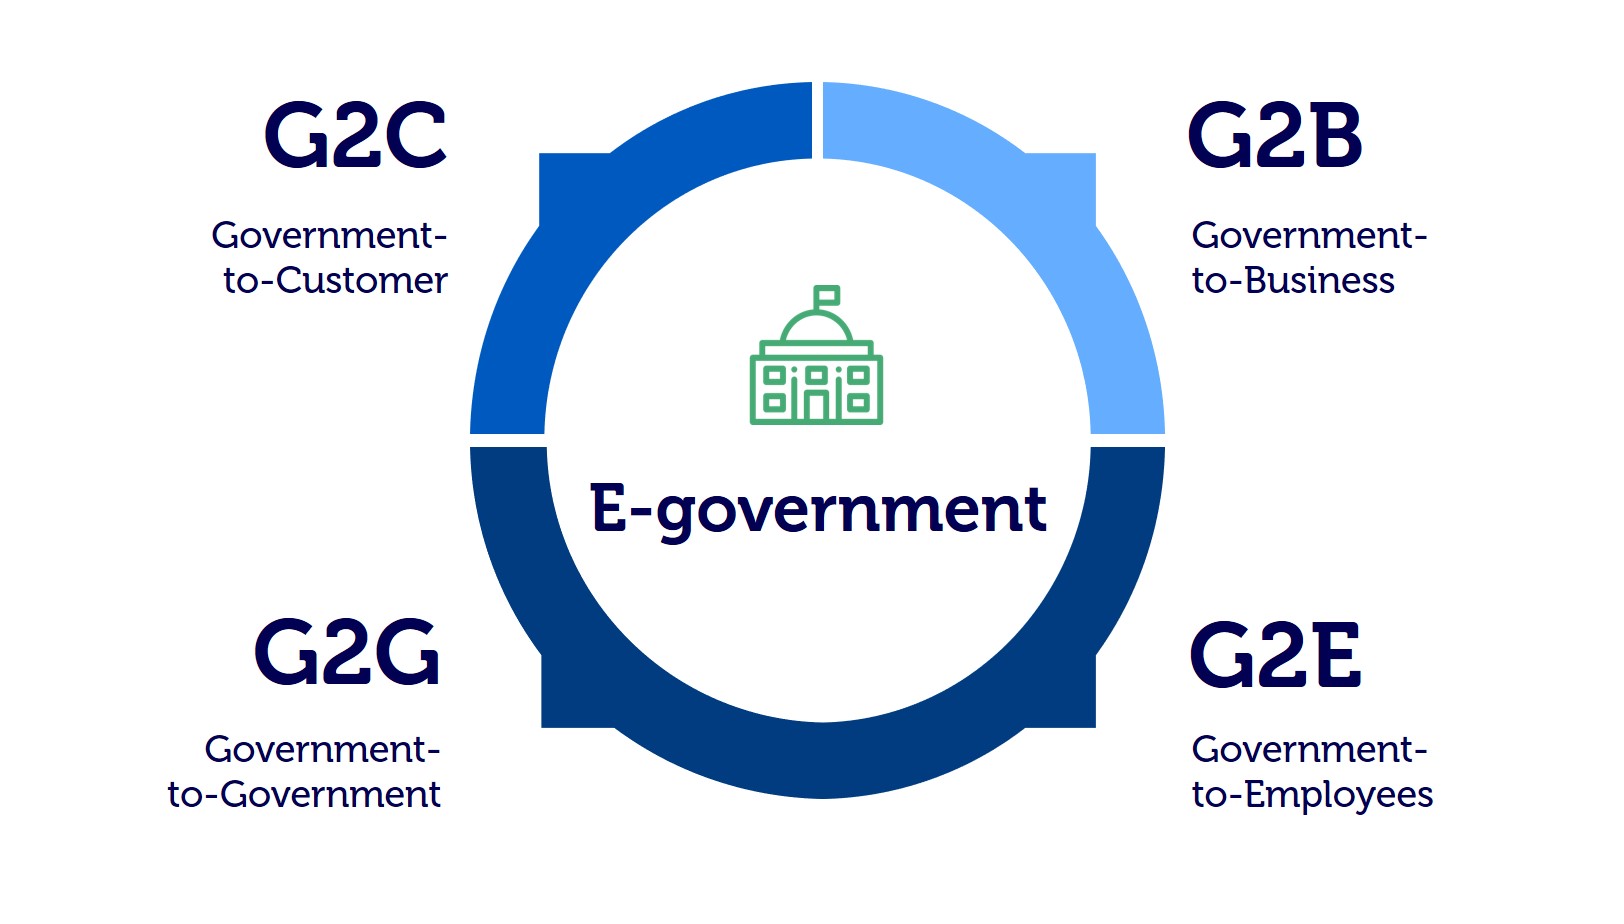 G2g government-to-government